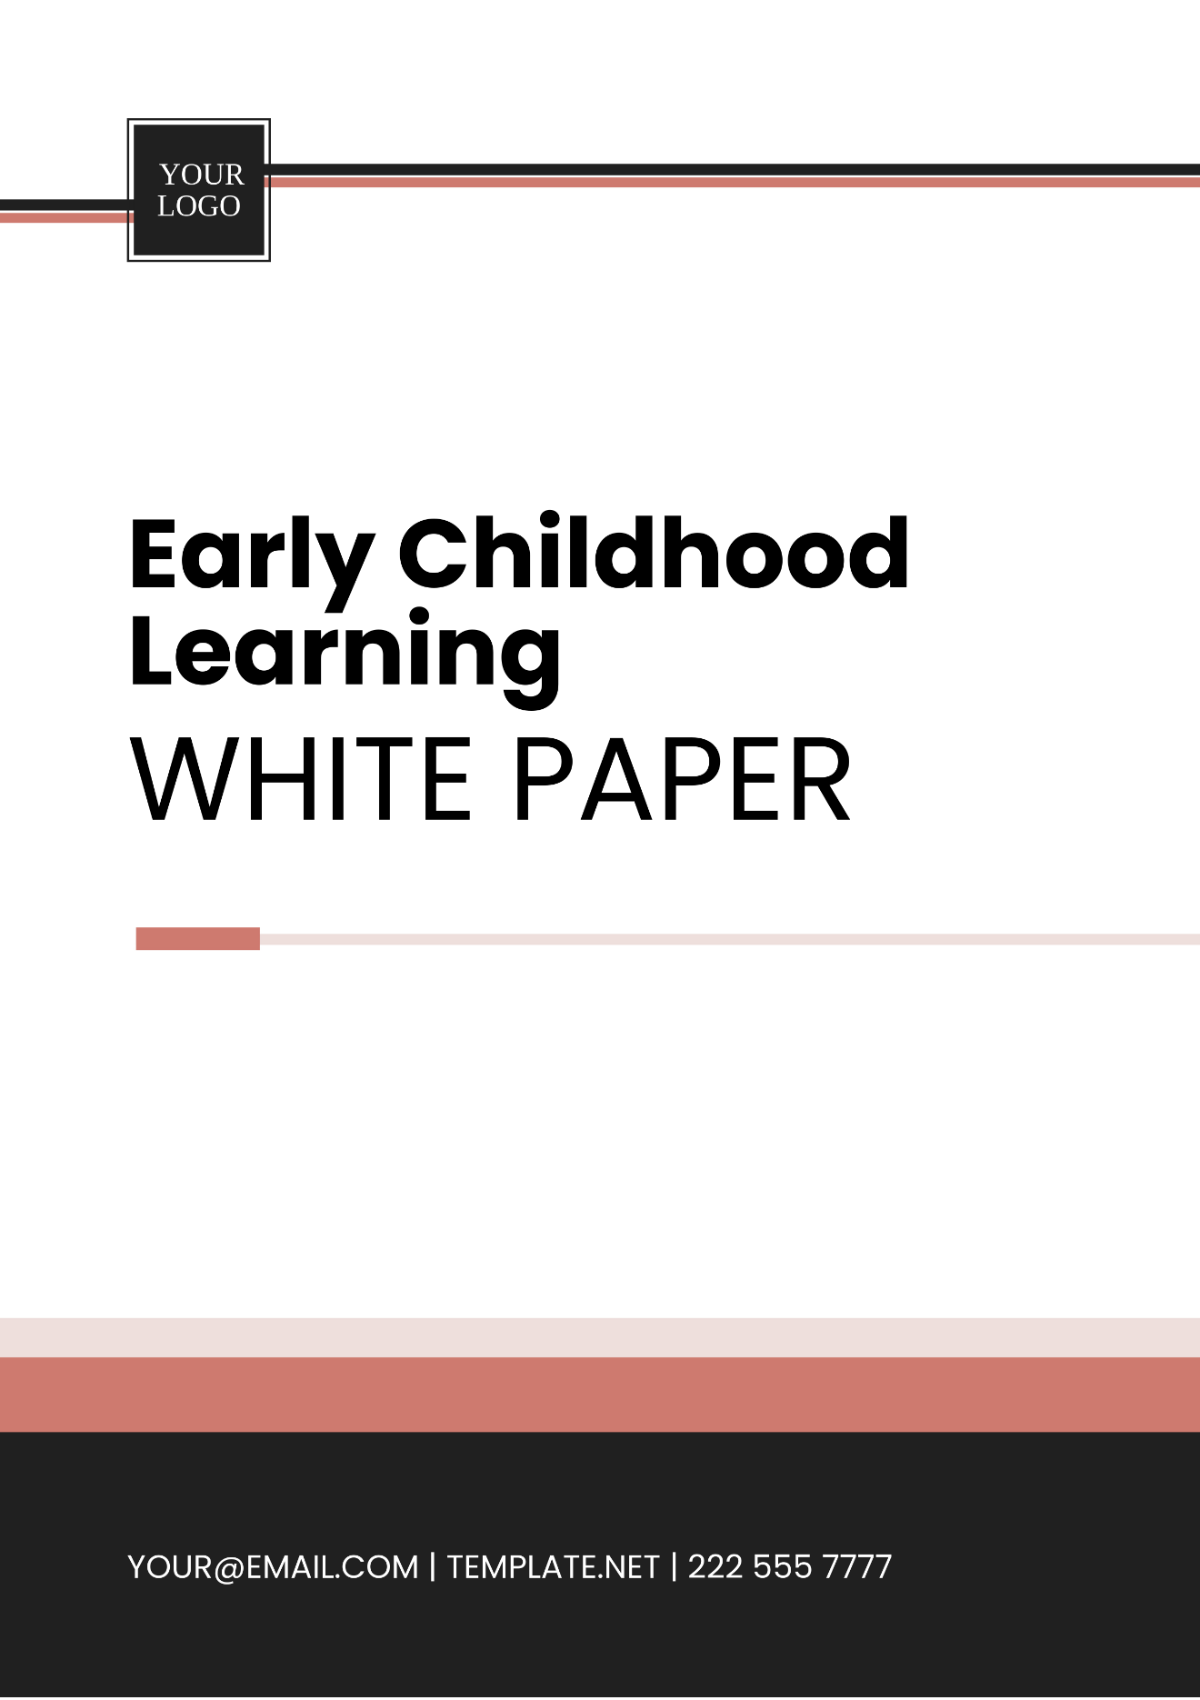 Early Childhood Learning White Paper Template